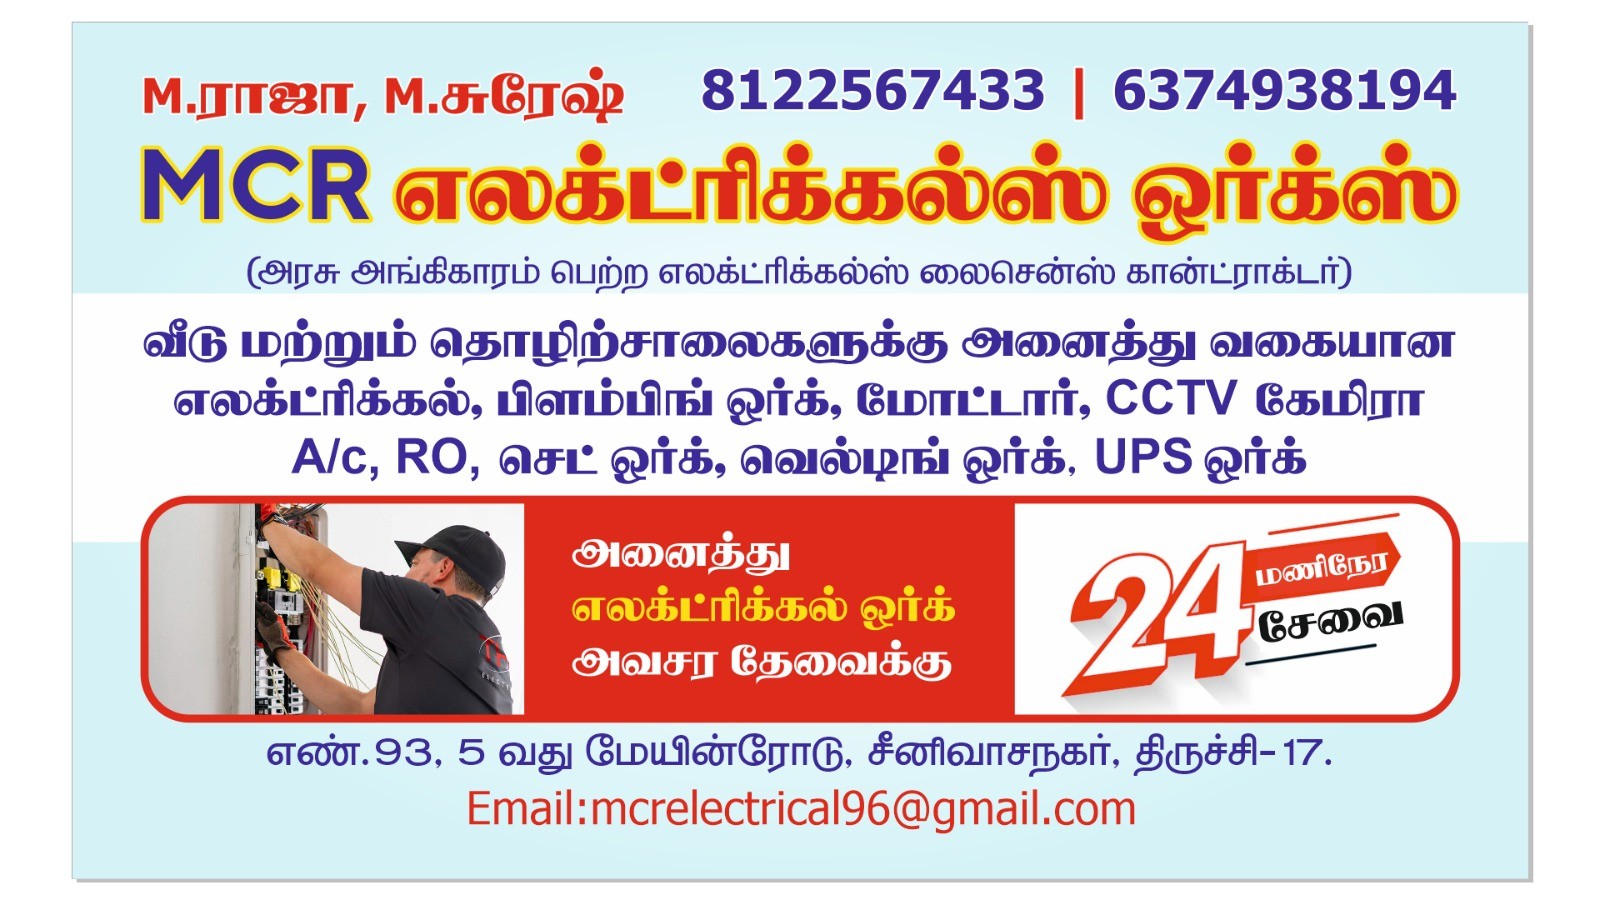 Electrician, Plumber; Exp: More than 15 year